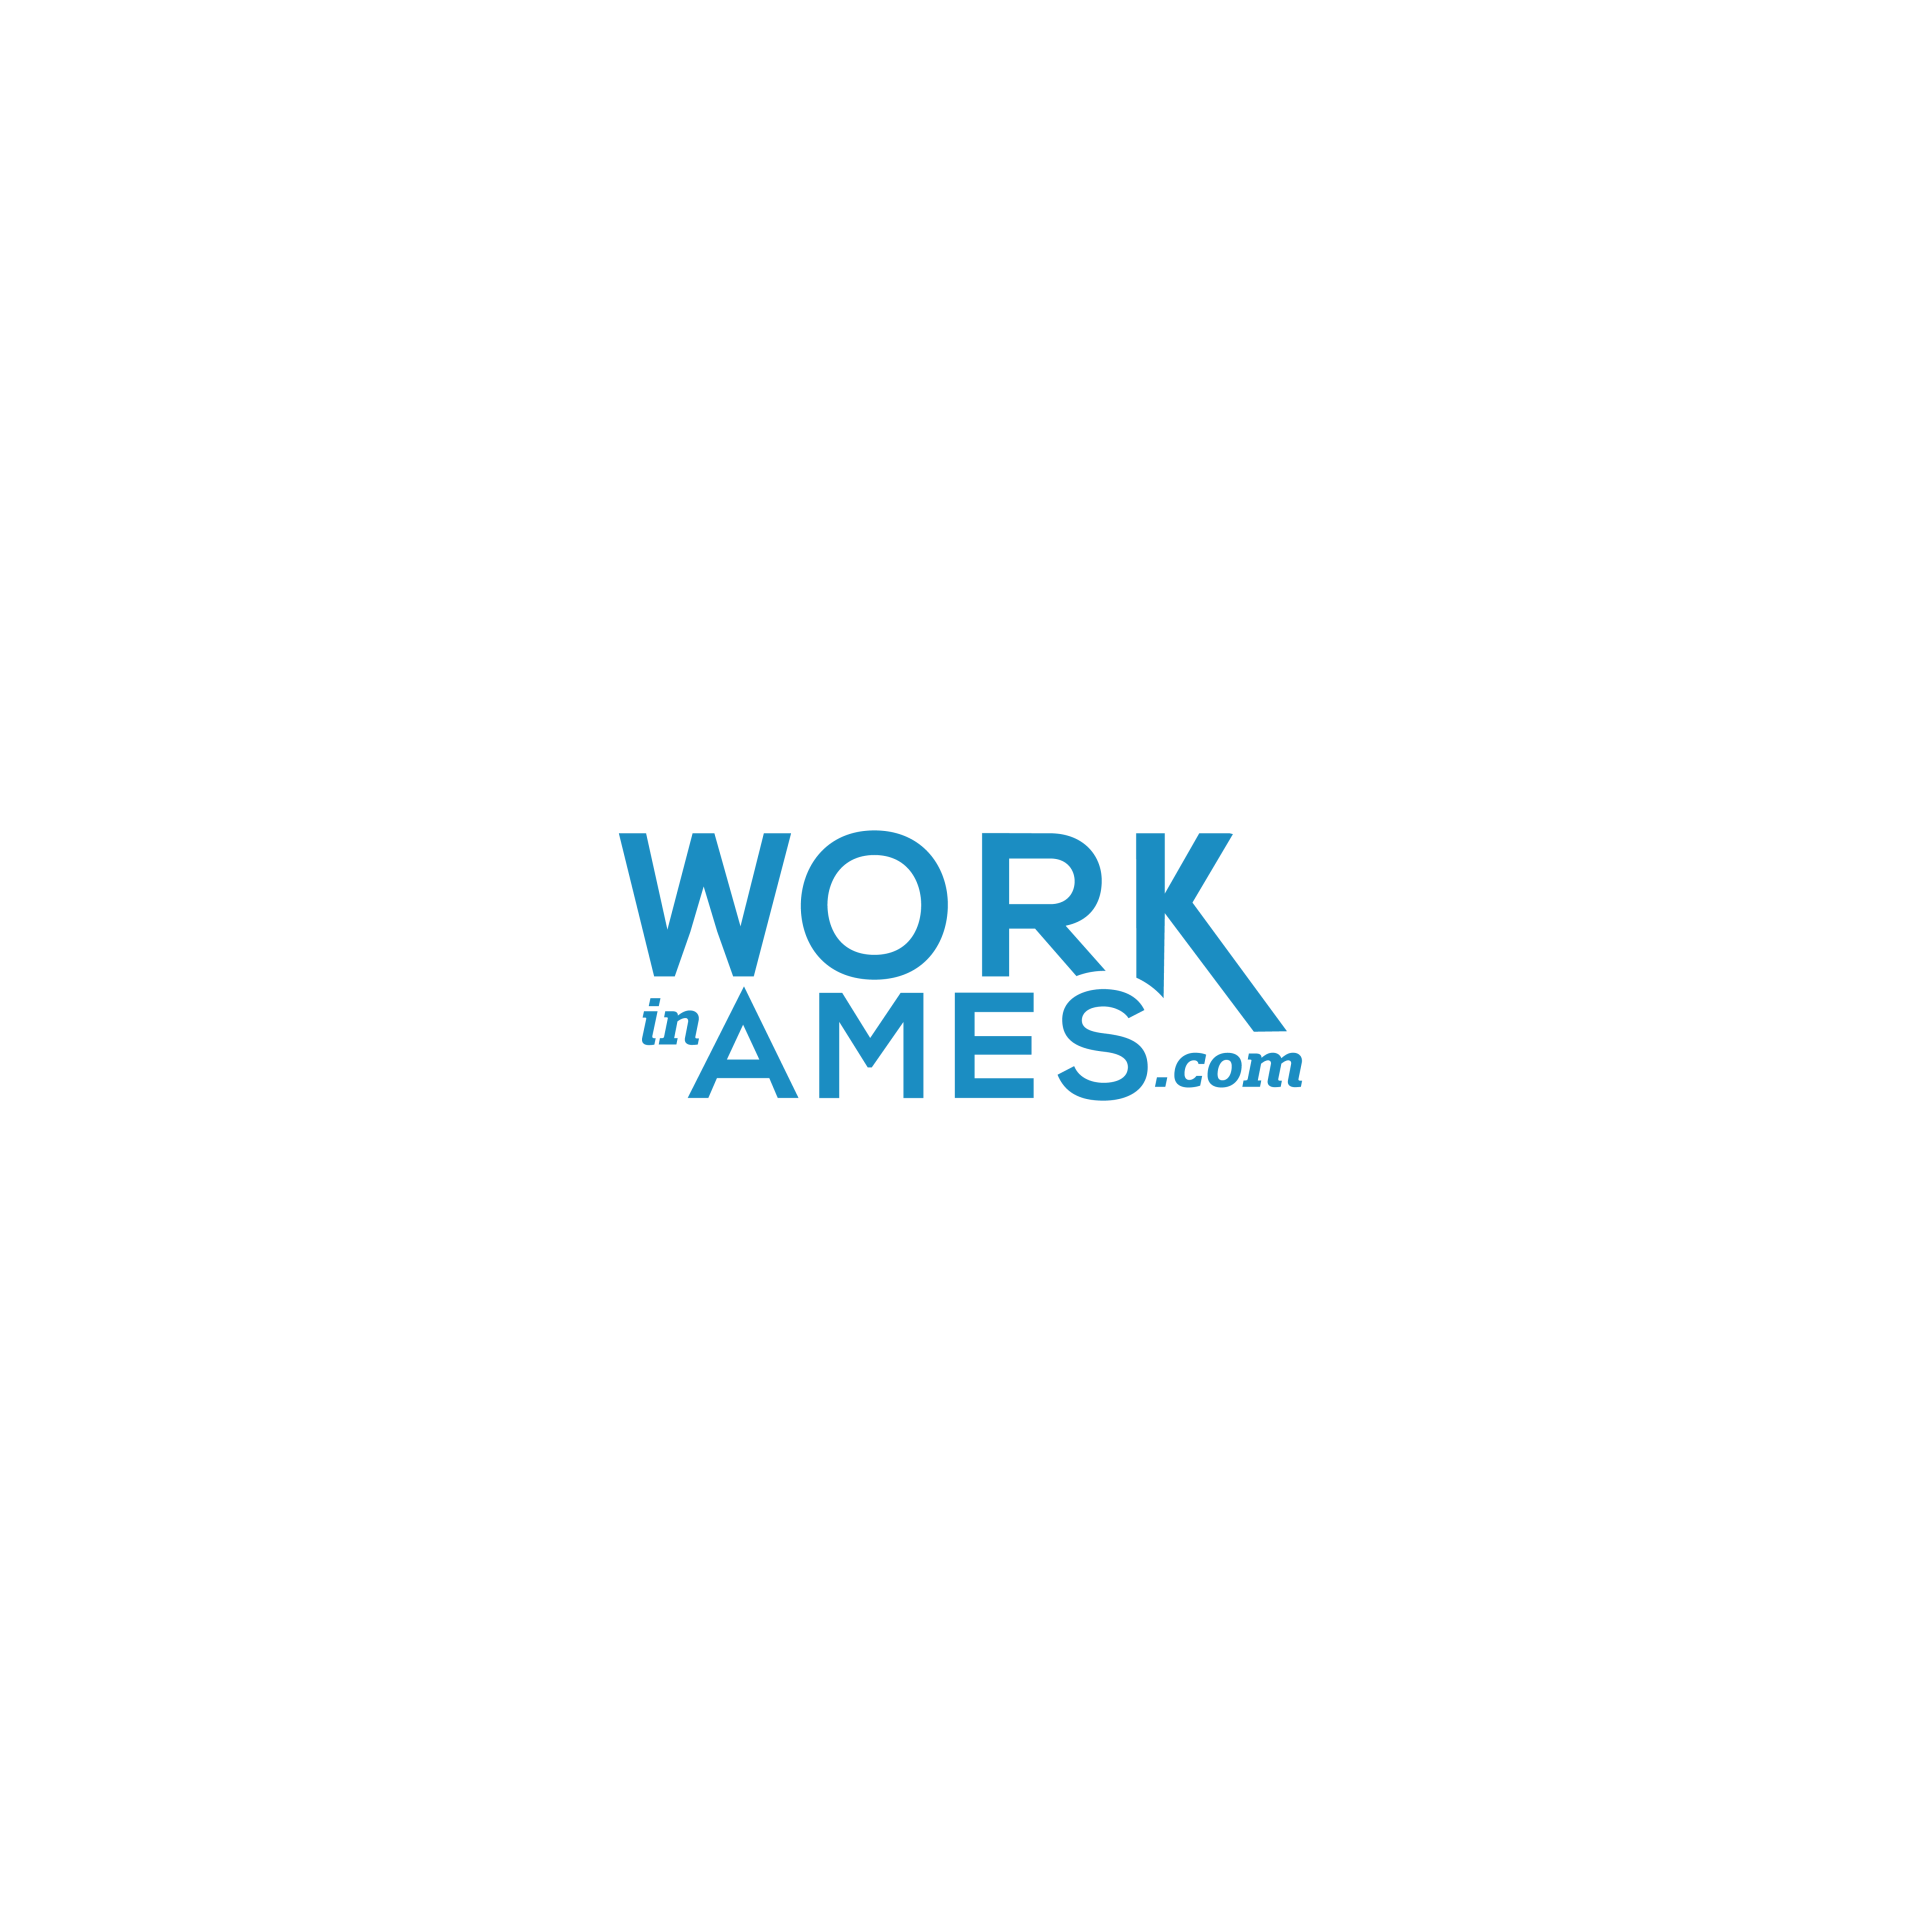 The logo for work in ames.com is blue on a white background.